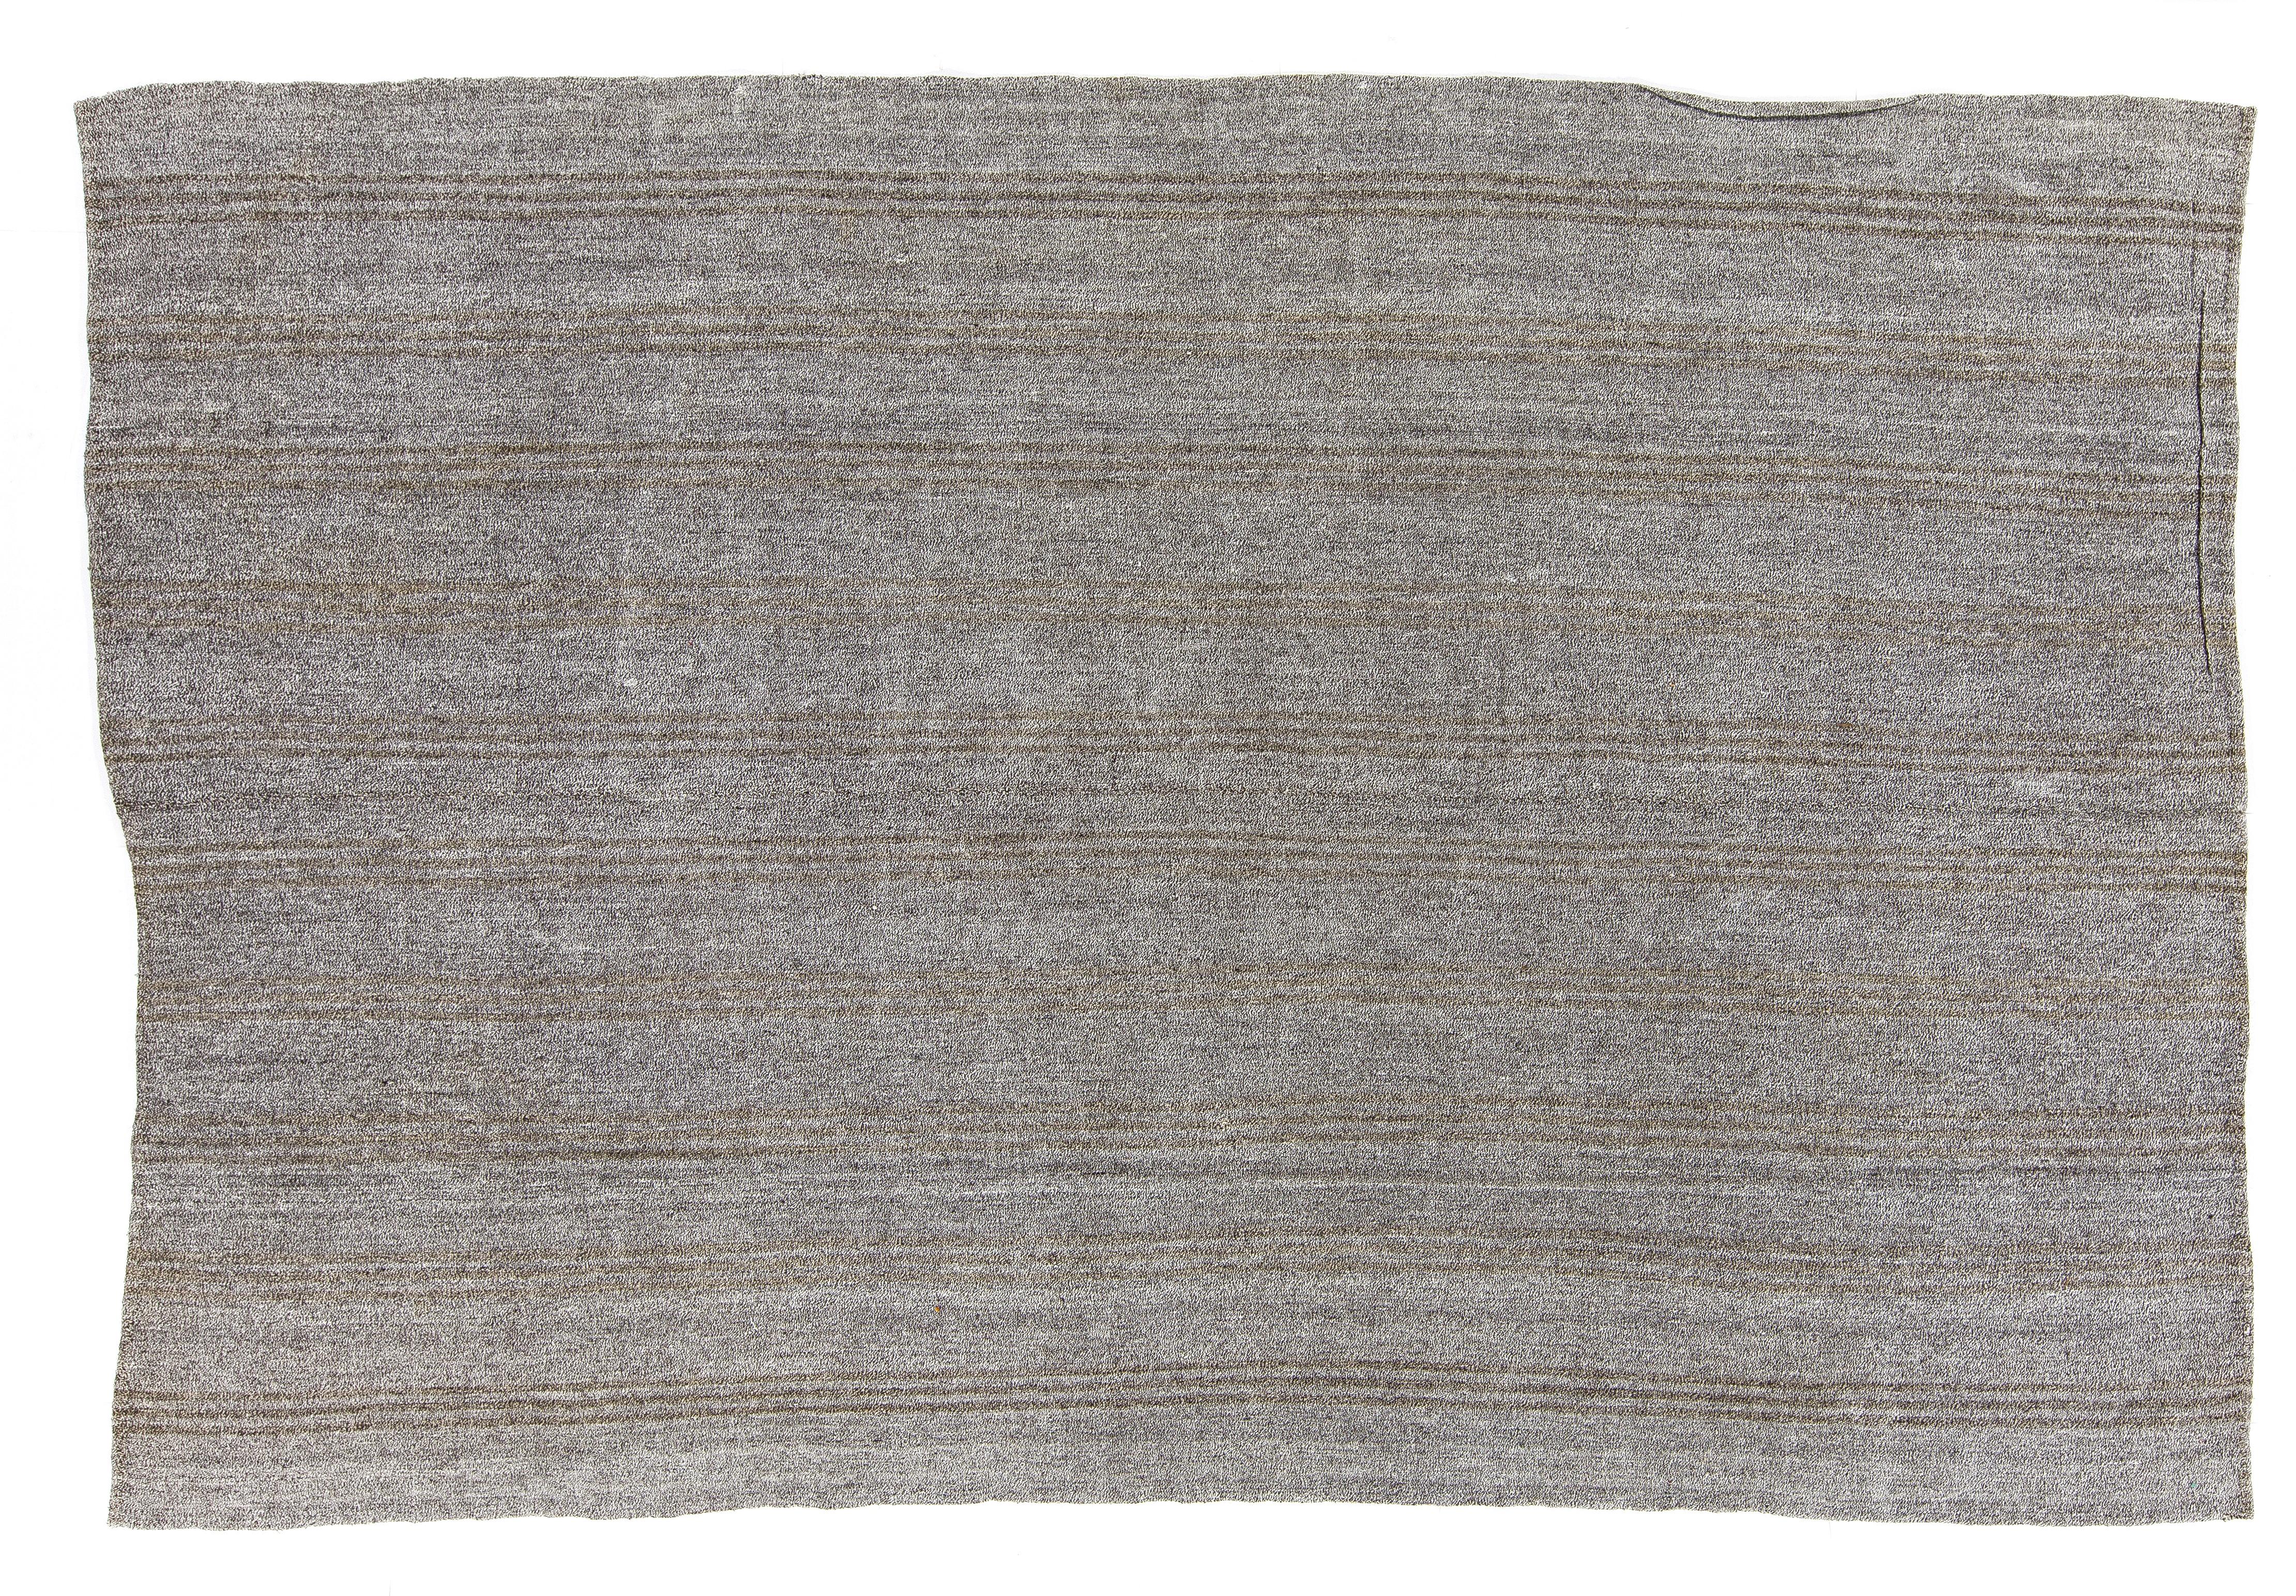 20th Century 7.8x11.5 Ft Natural Goat Wool and Hemp Turkish Kilim, Light Gray & Brown Rug For Sale